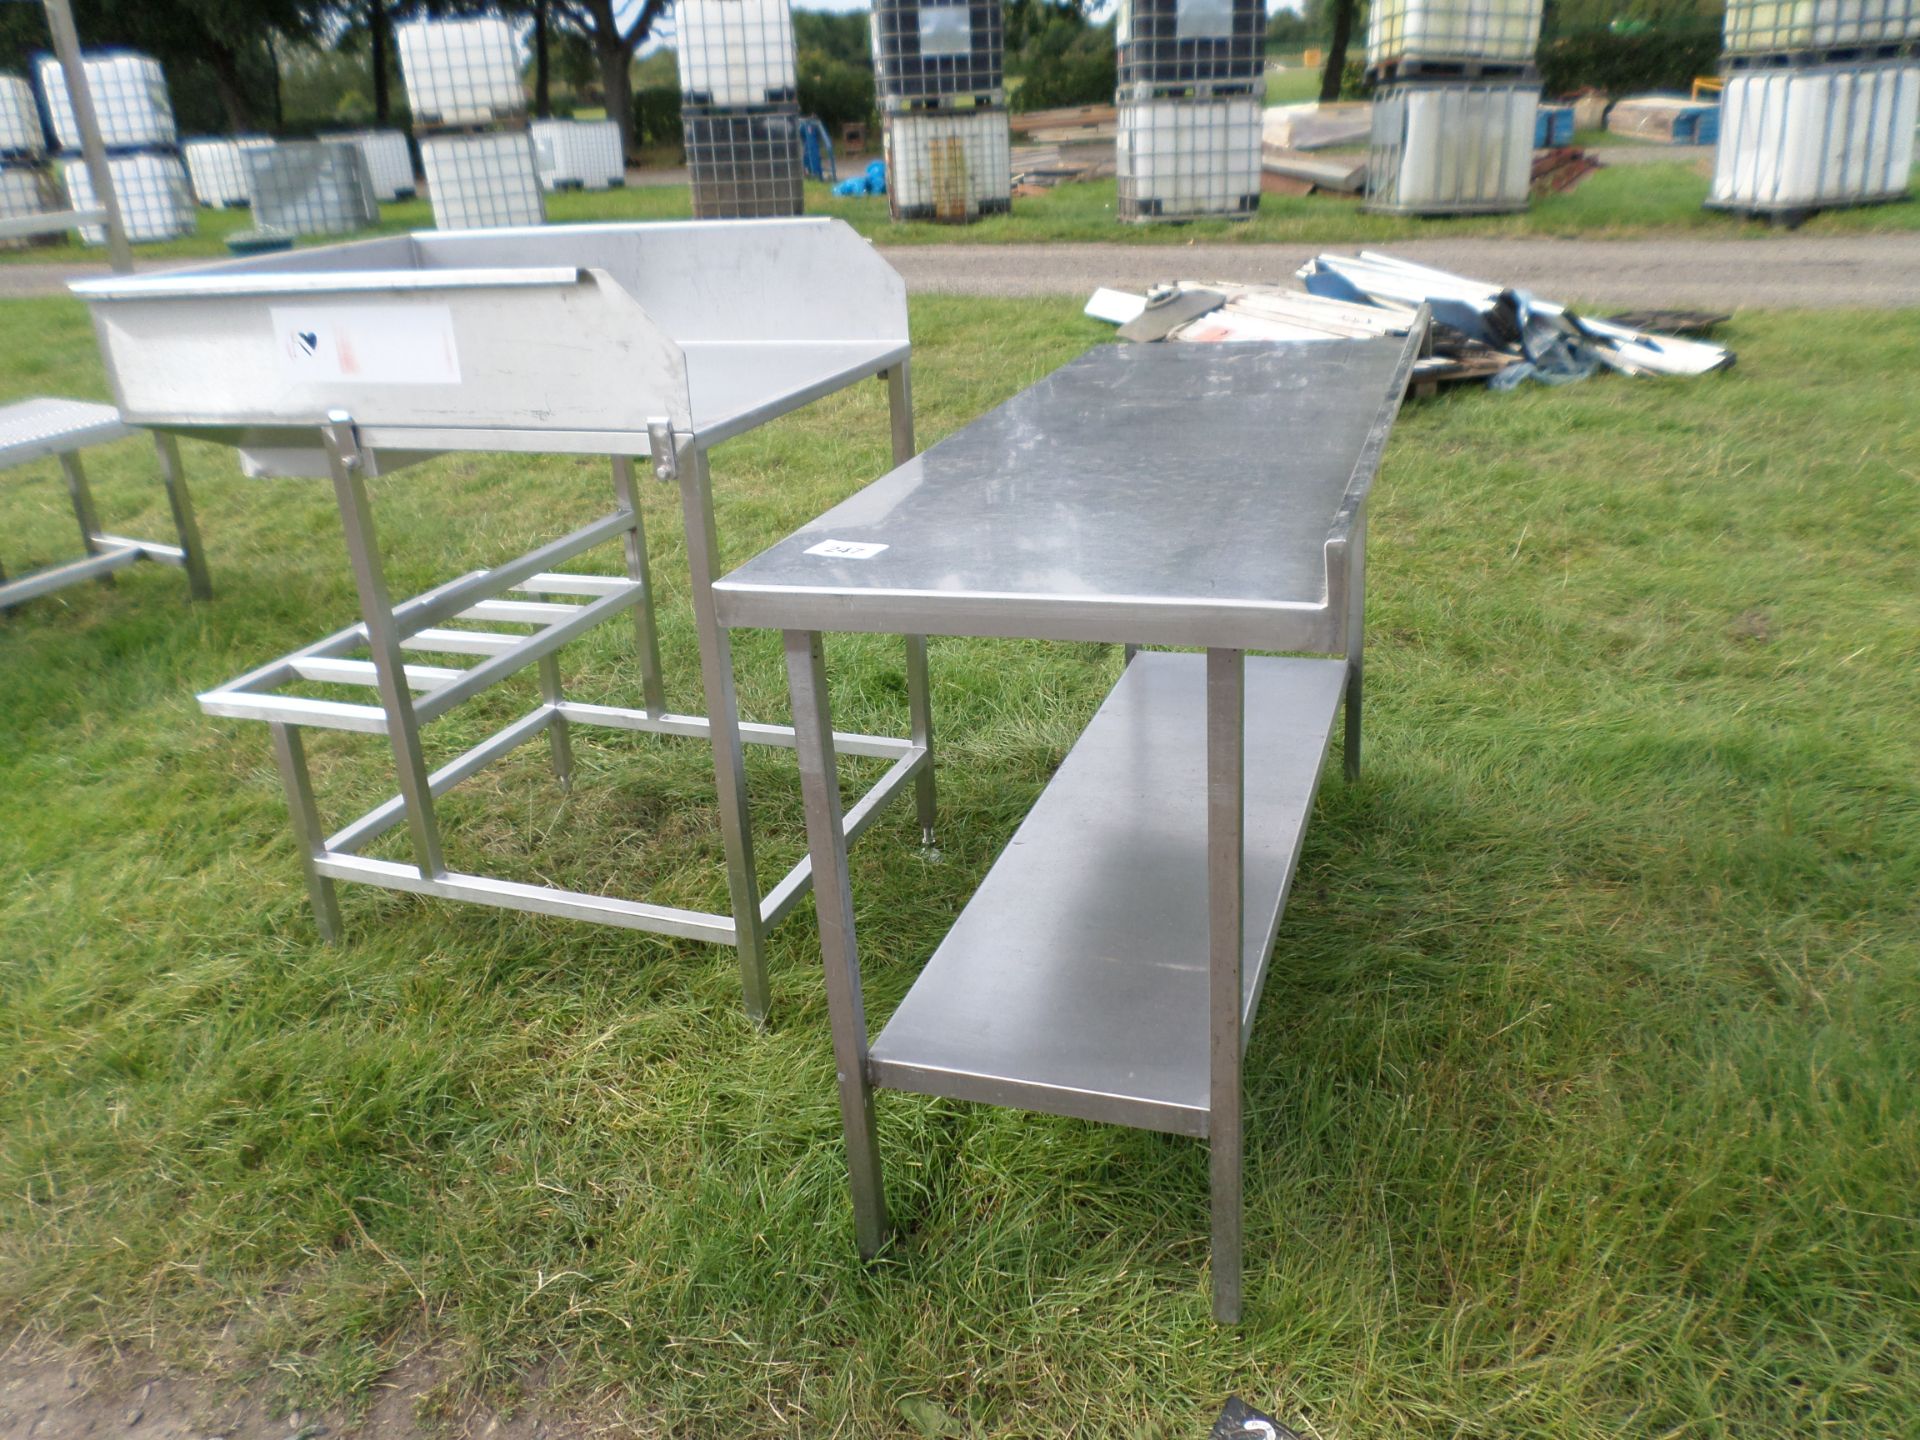 Stainless steel table and shelves